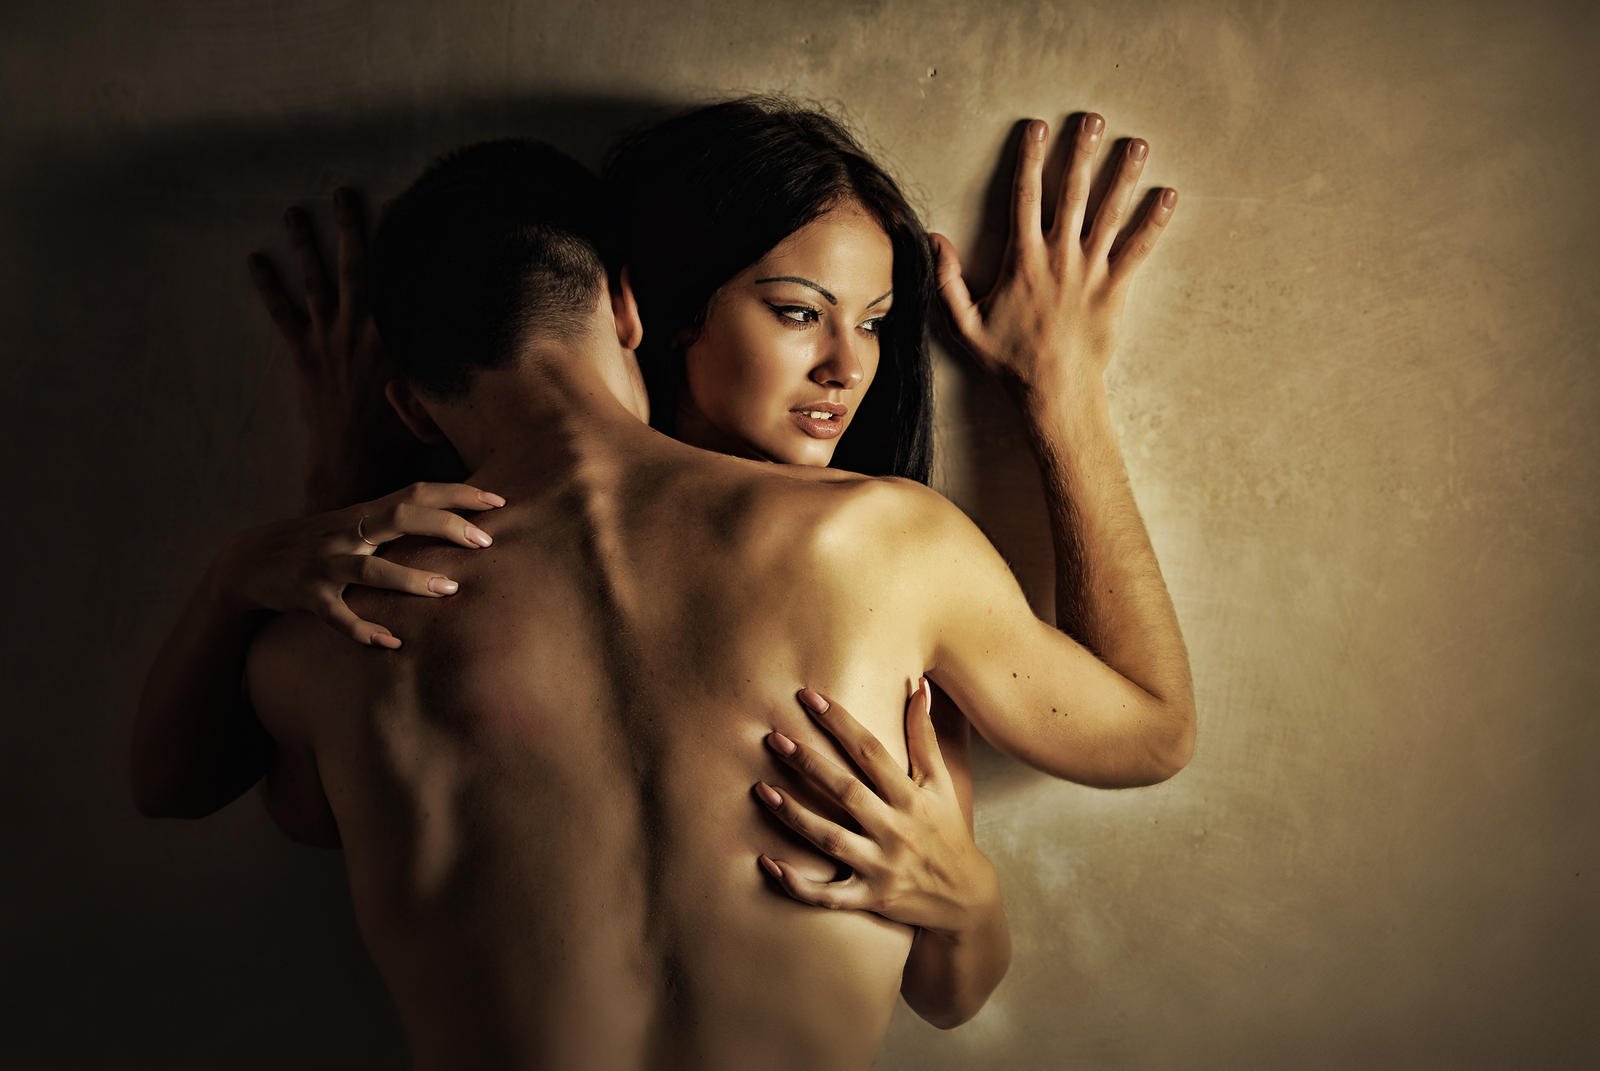 Weird Sexual Fetishes - 15 Sexual Fetishes That Are Way More Common Than You'd Imagine